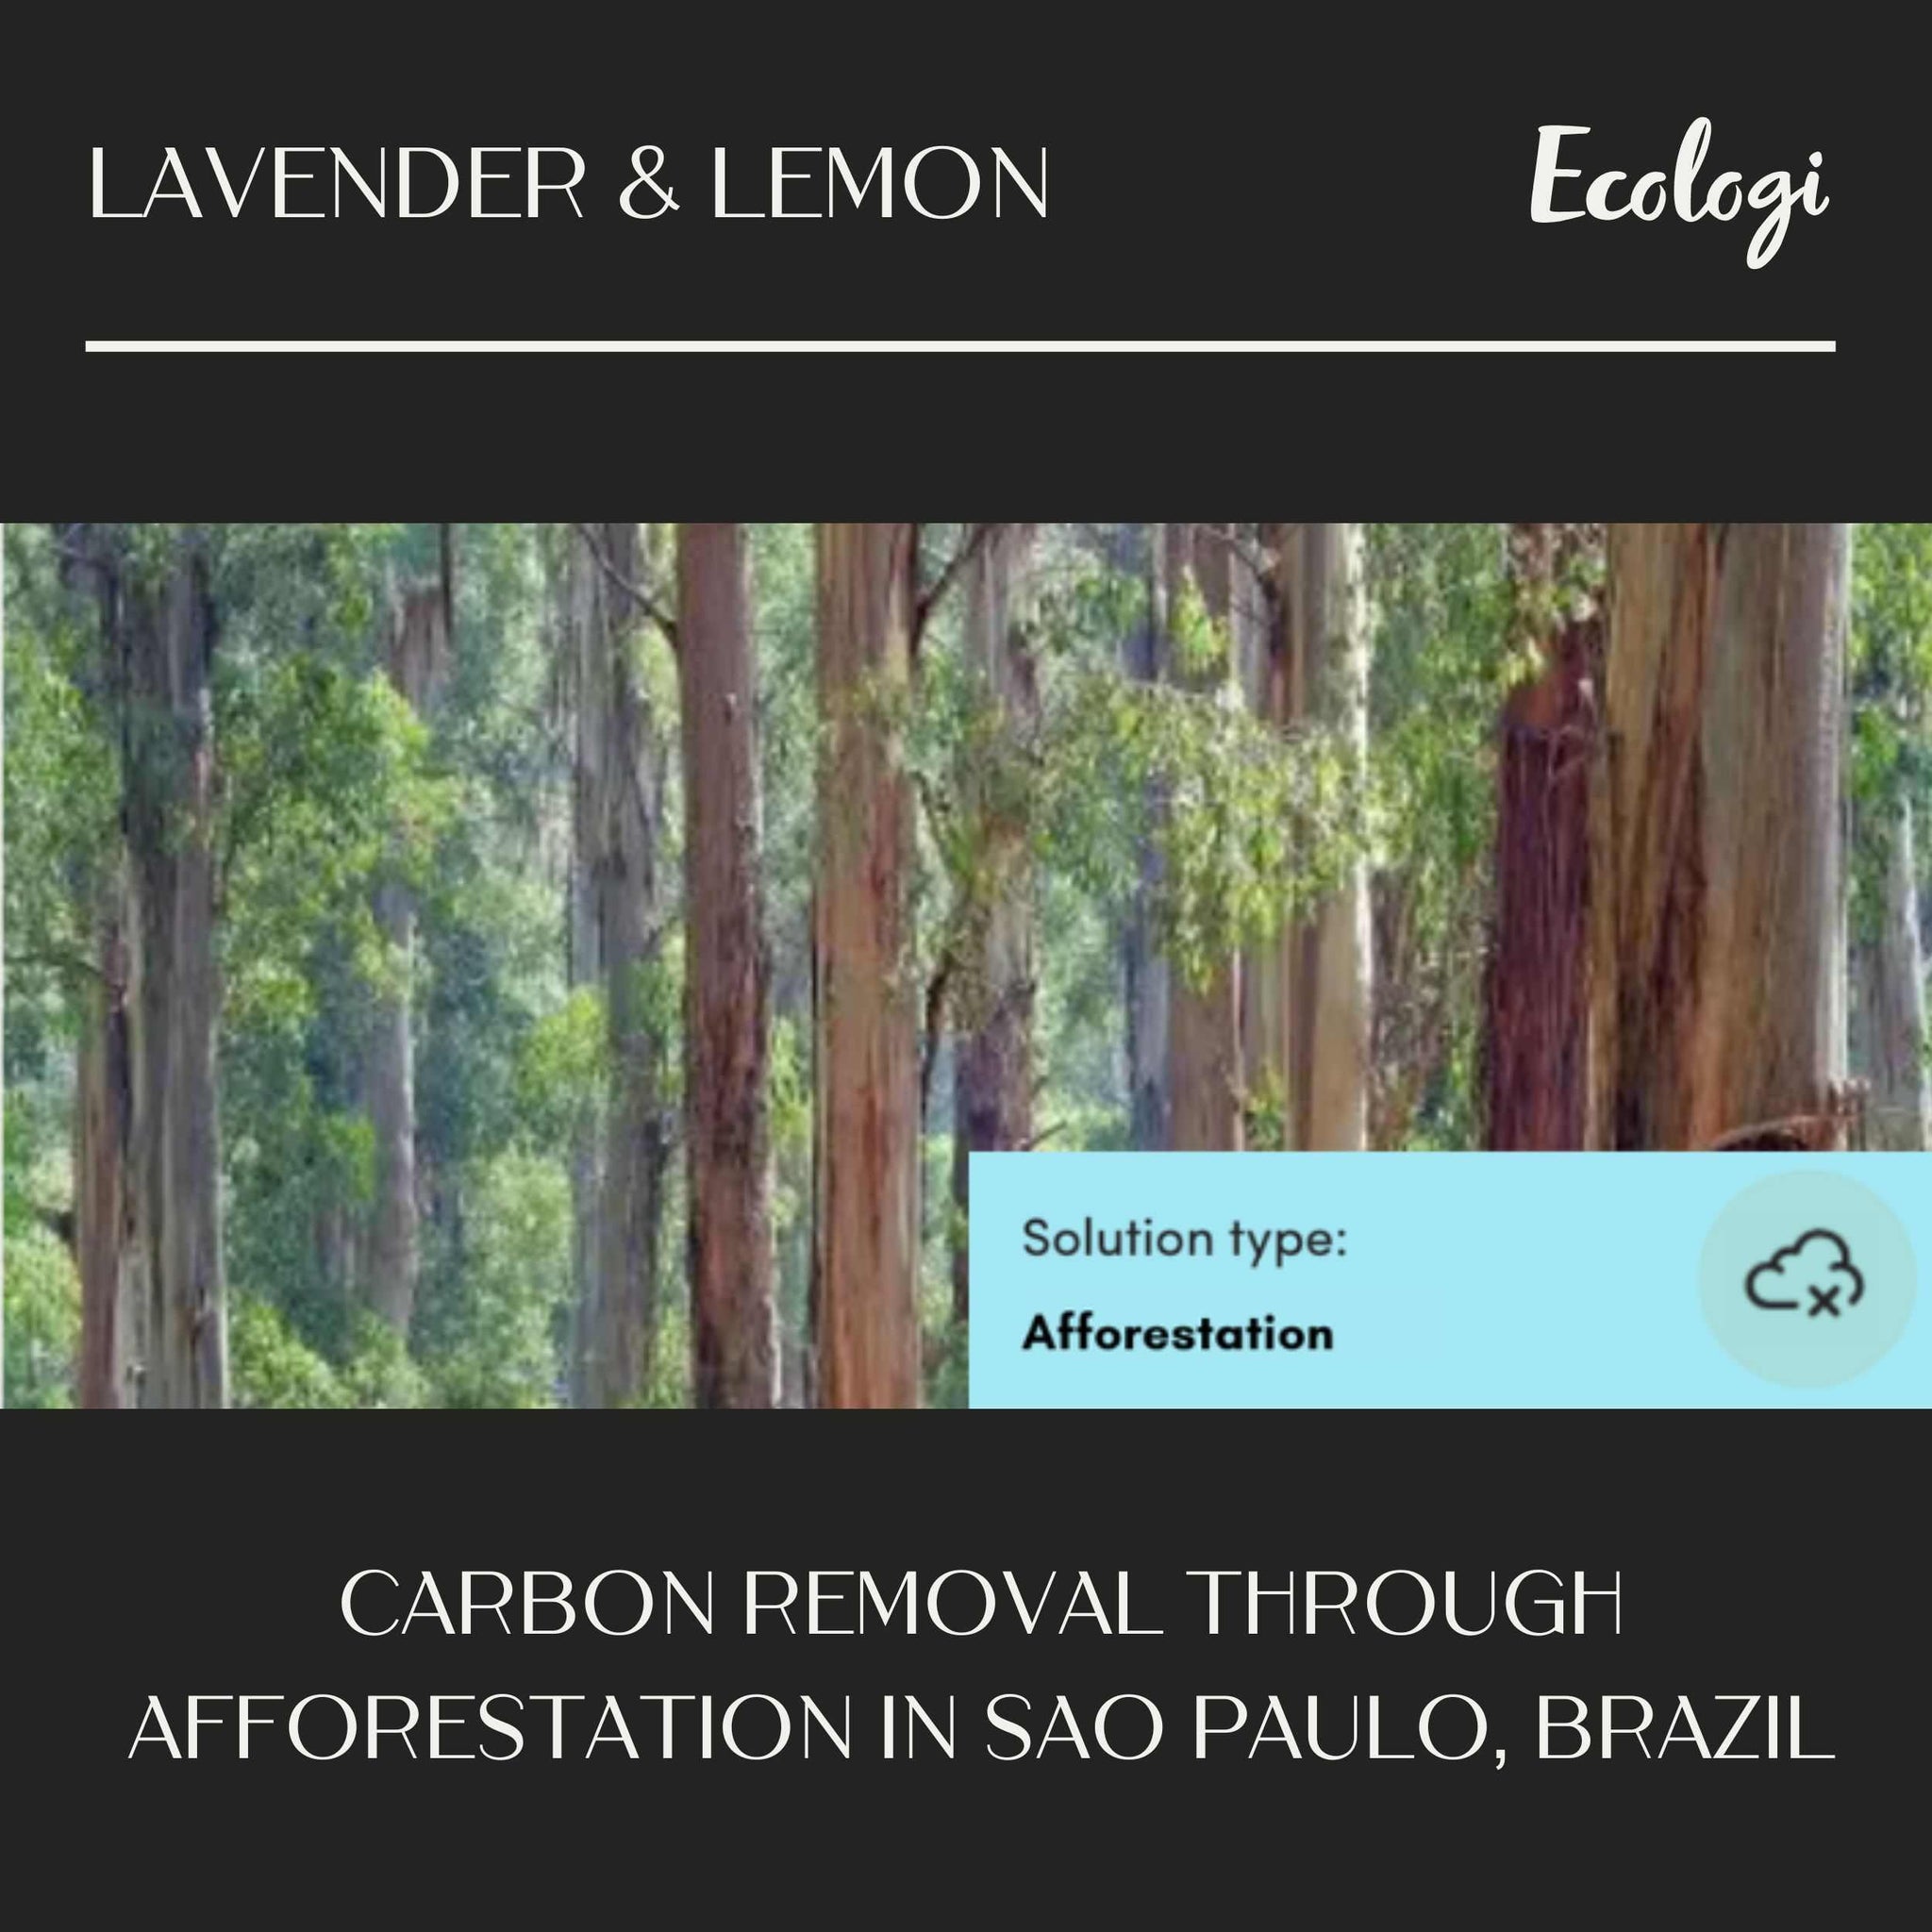 Carbon removal through afforestation in sao paulo, brazil